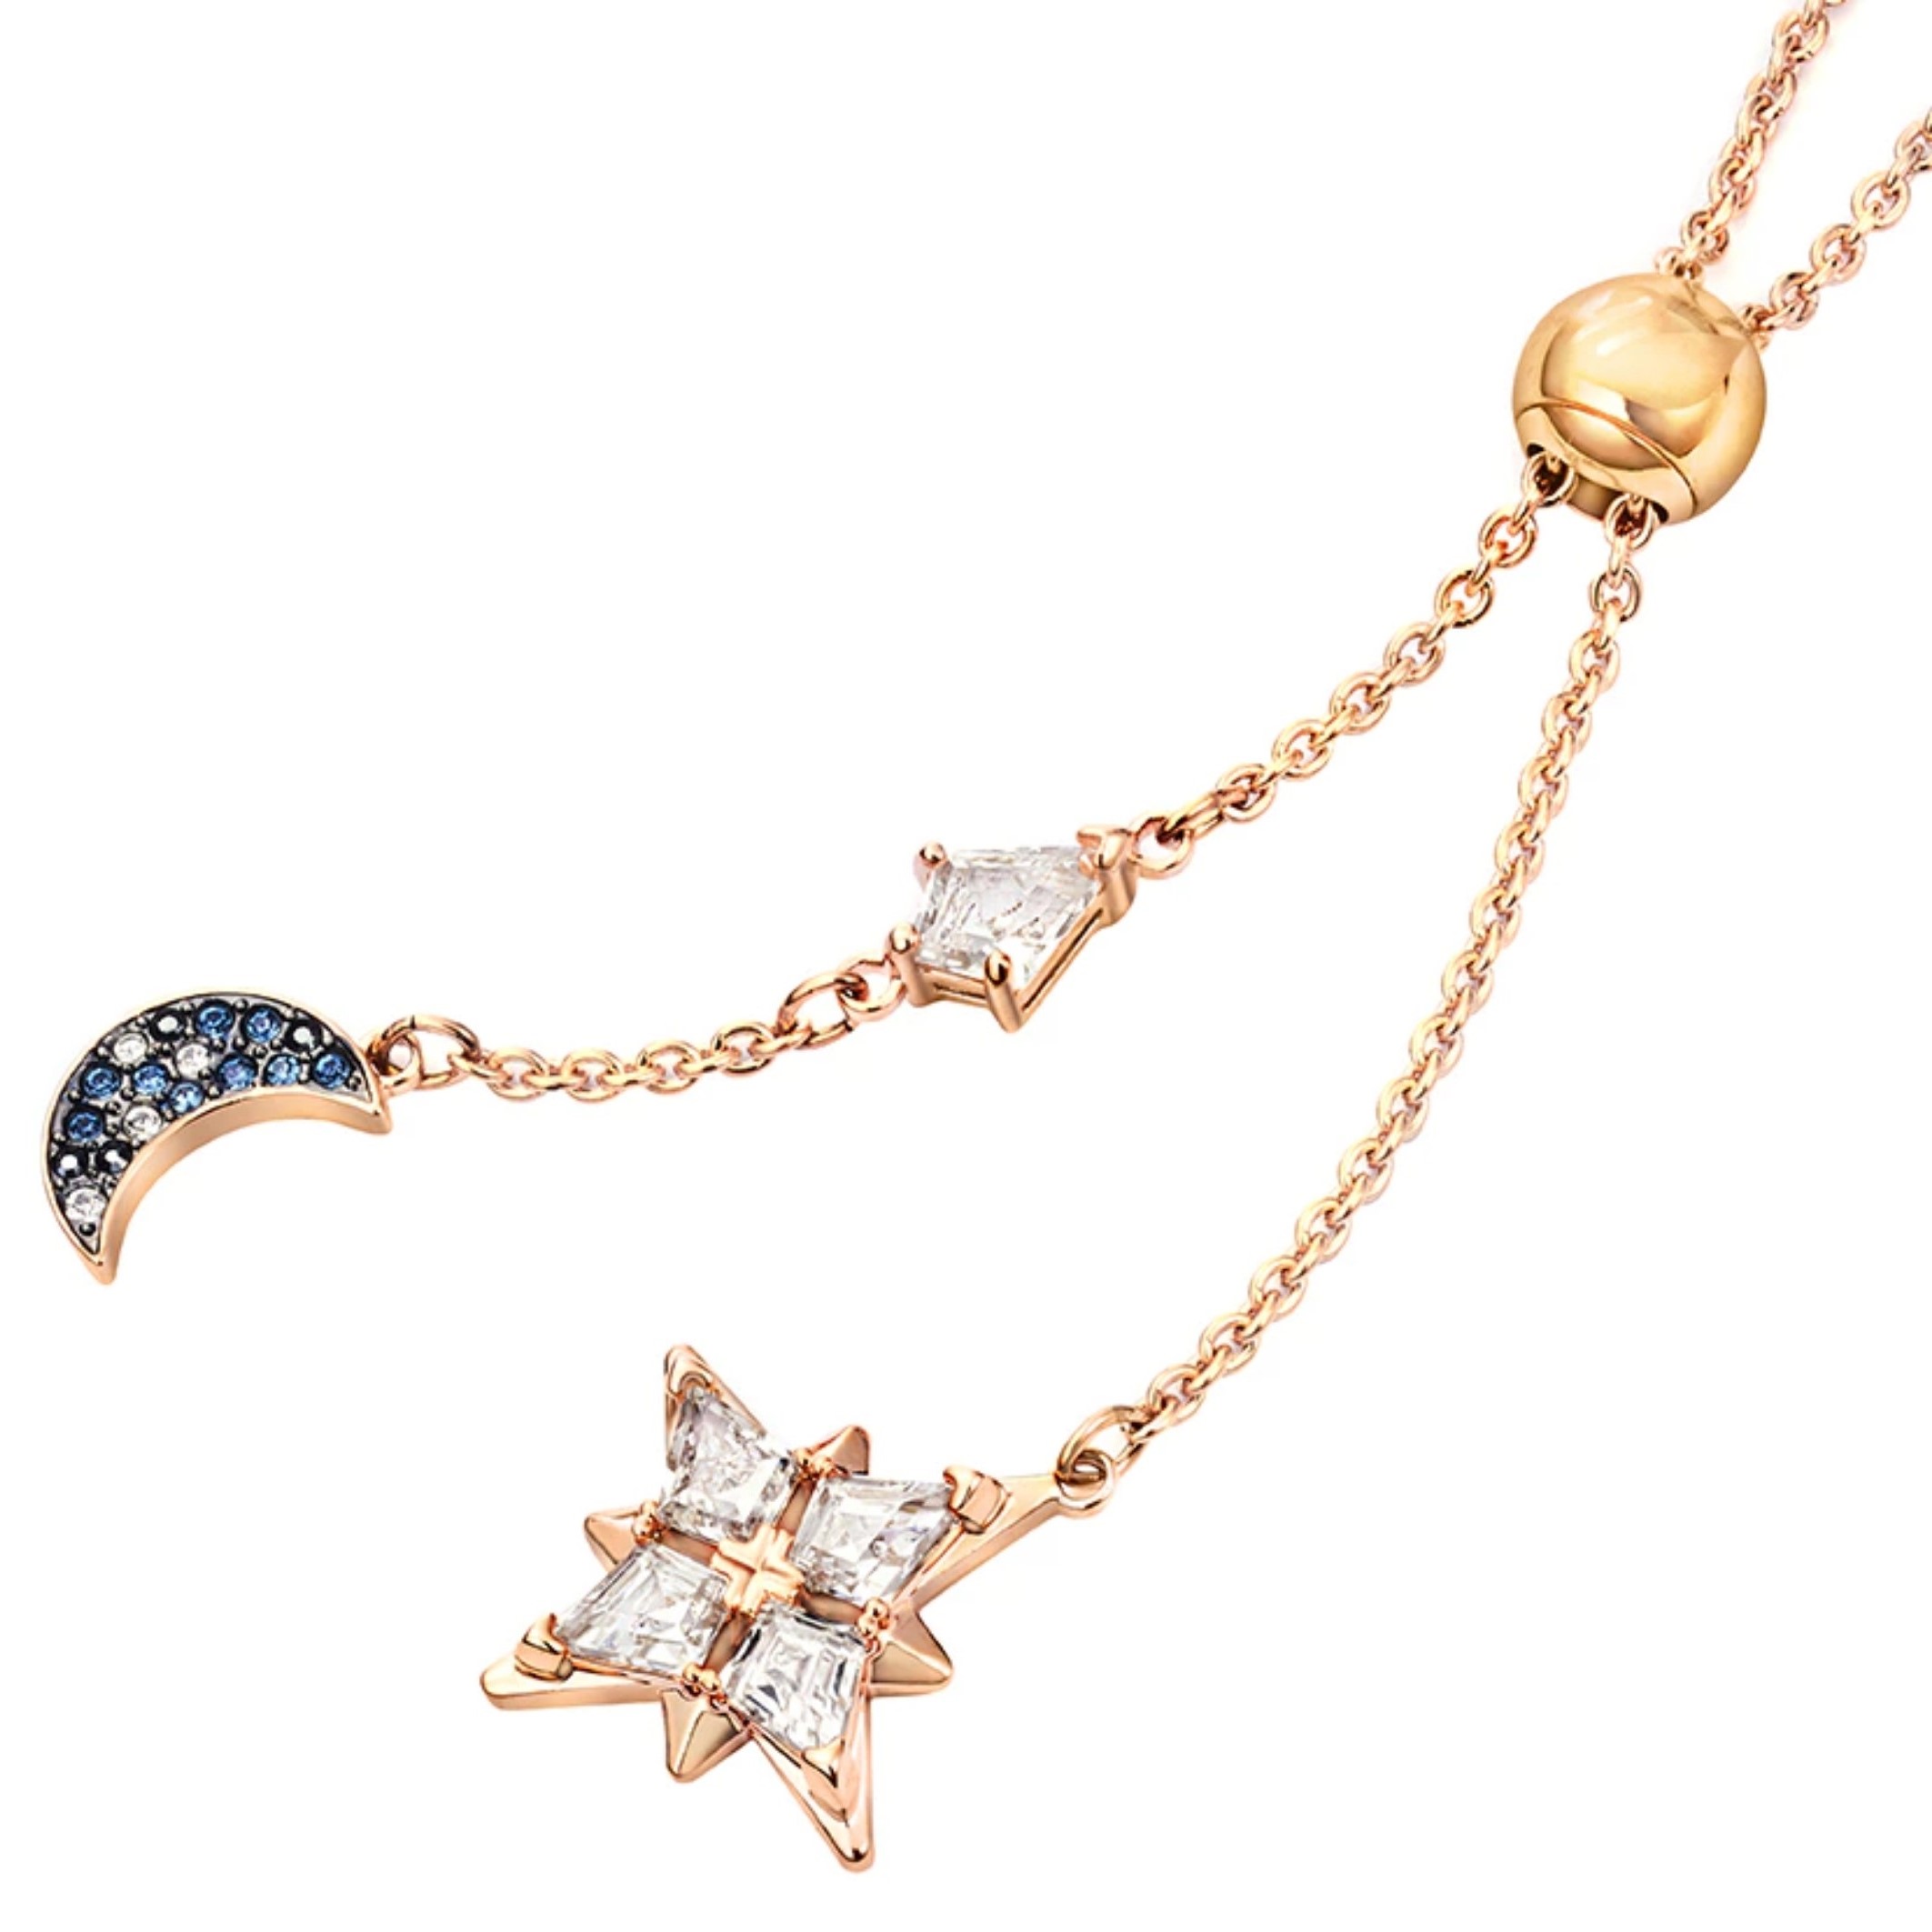 DÂY CHUYỀN SWAROVSKI SYMBOLIC Y NECKLACE MULTI-COLORED ROSE-GOLD TONE PLATED 5494357 5